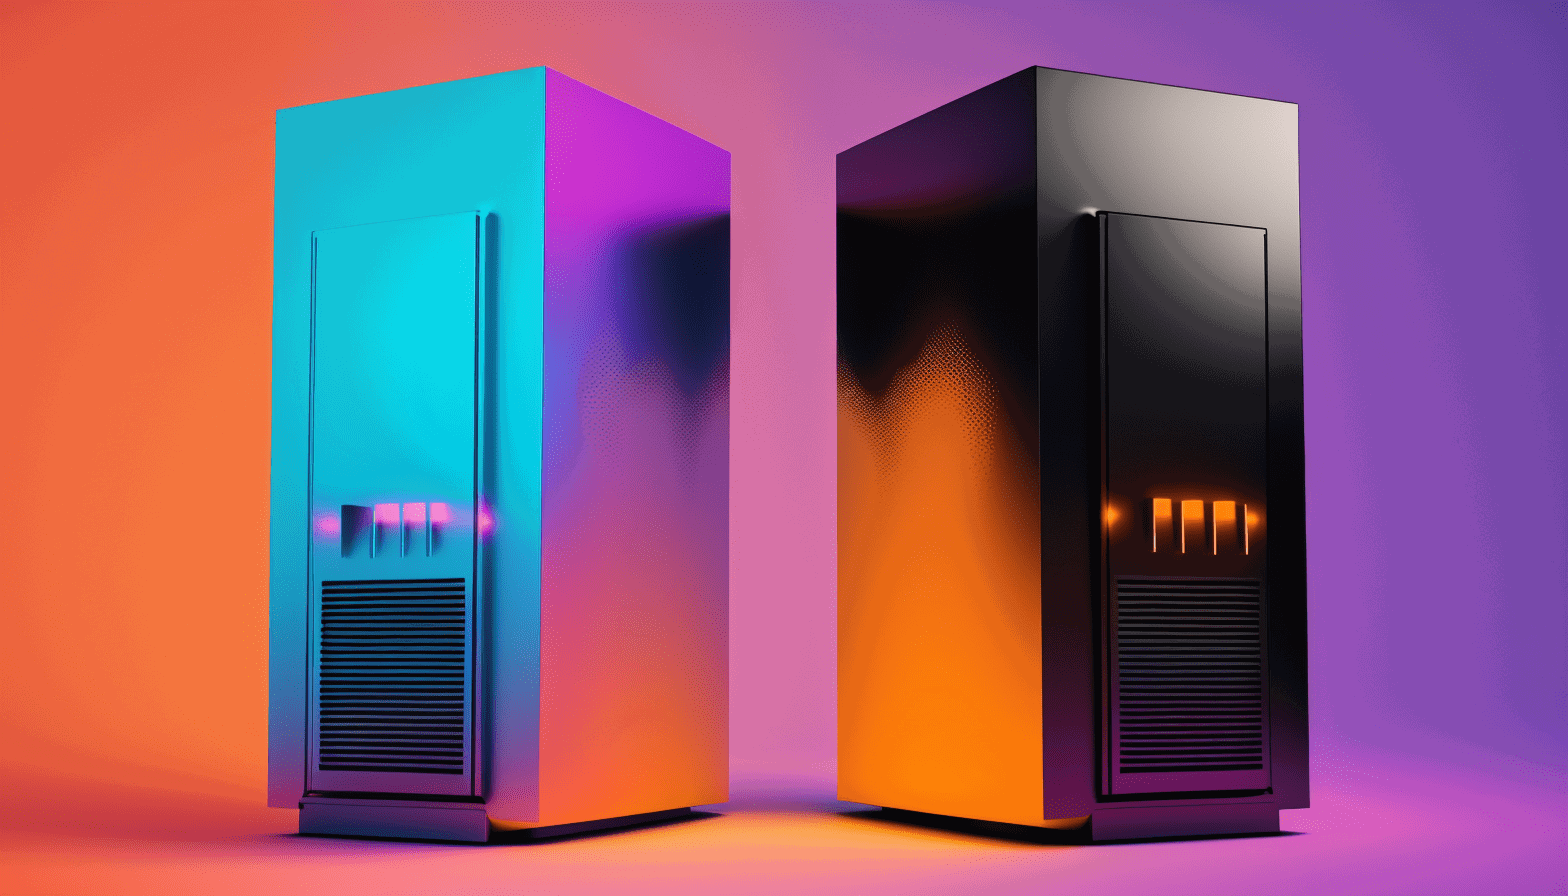 A pair of servers facing each other. Colors matching the themes of plex, black and orange, and jellyfin, lightblue and purple.